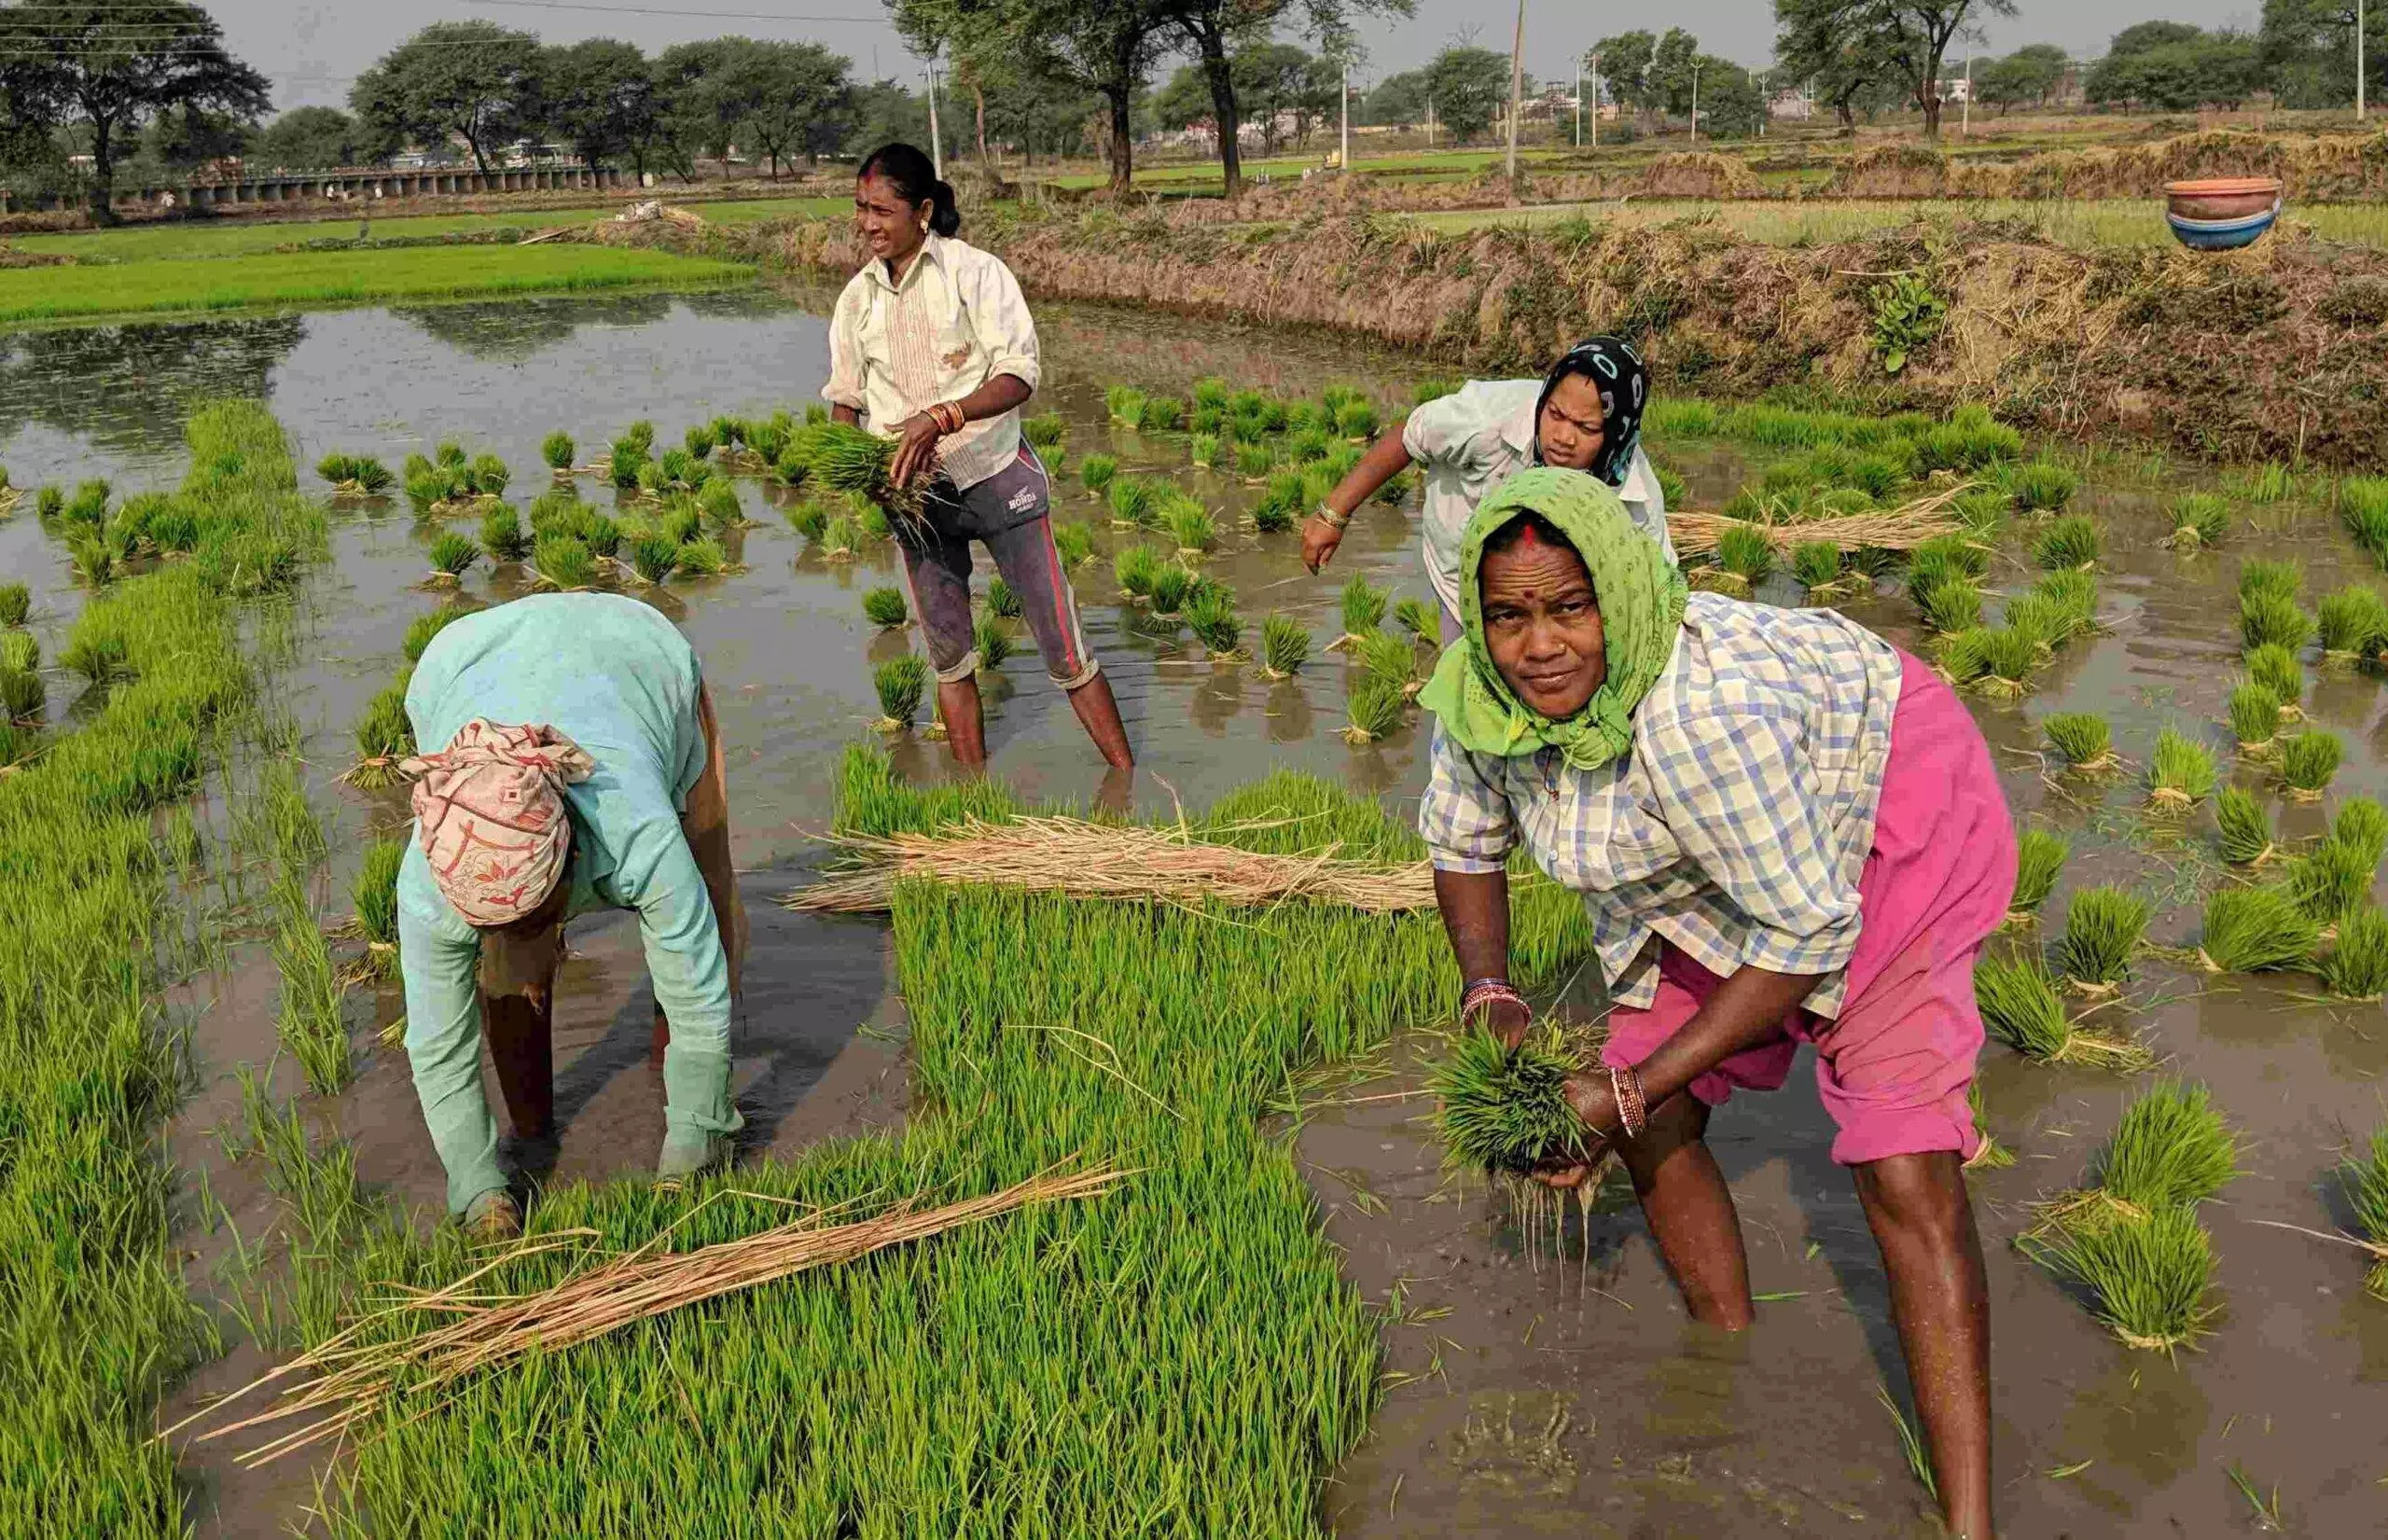 UN Report Finds 71% of Working Women in South Asia to be Engaged in Agrifood Systems